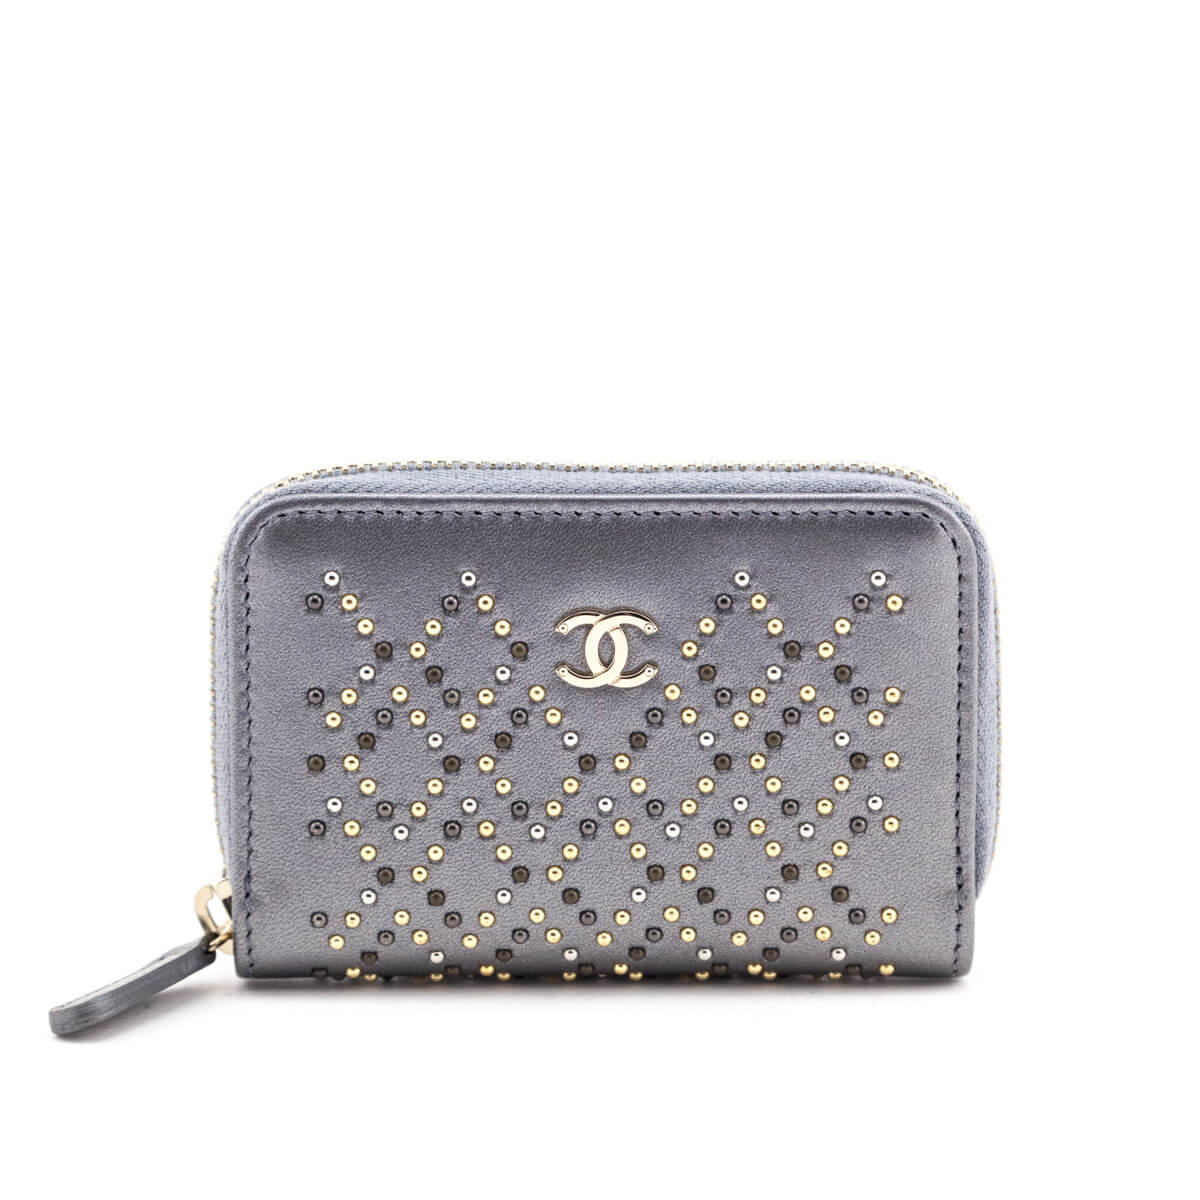 Chanel Metallic Gray Leather Studded Zip Coin Purse Wallet - Love that Bag etc - Preowned Authentic Designer Handbags & Preloved Fashions